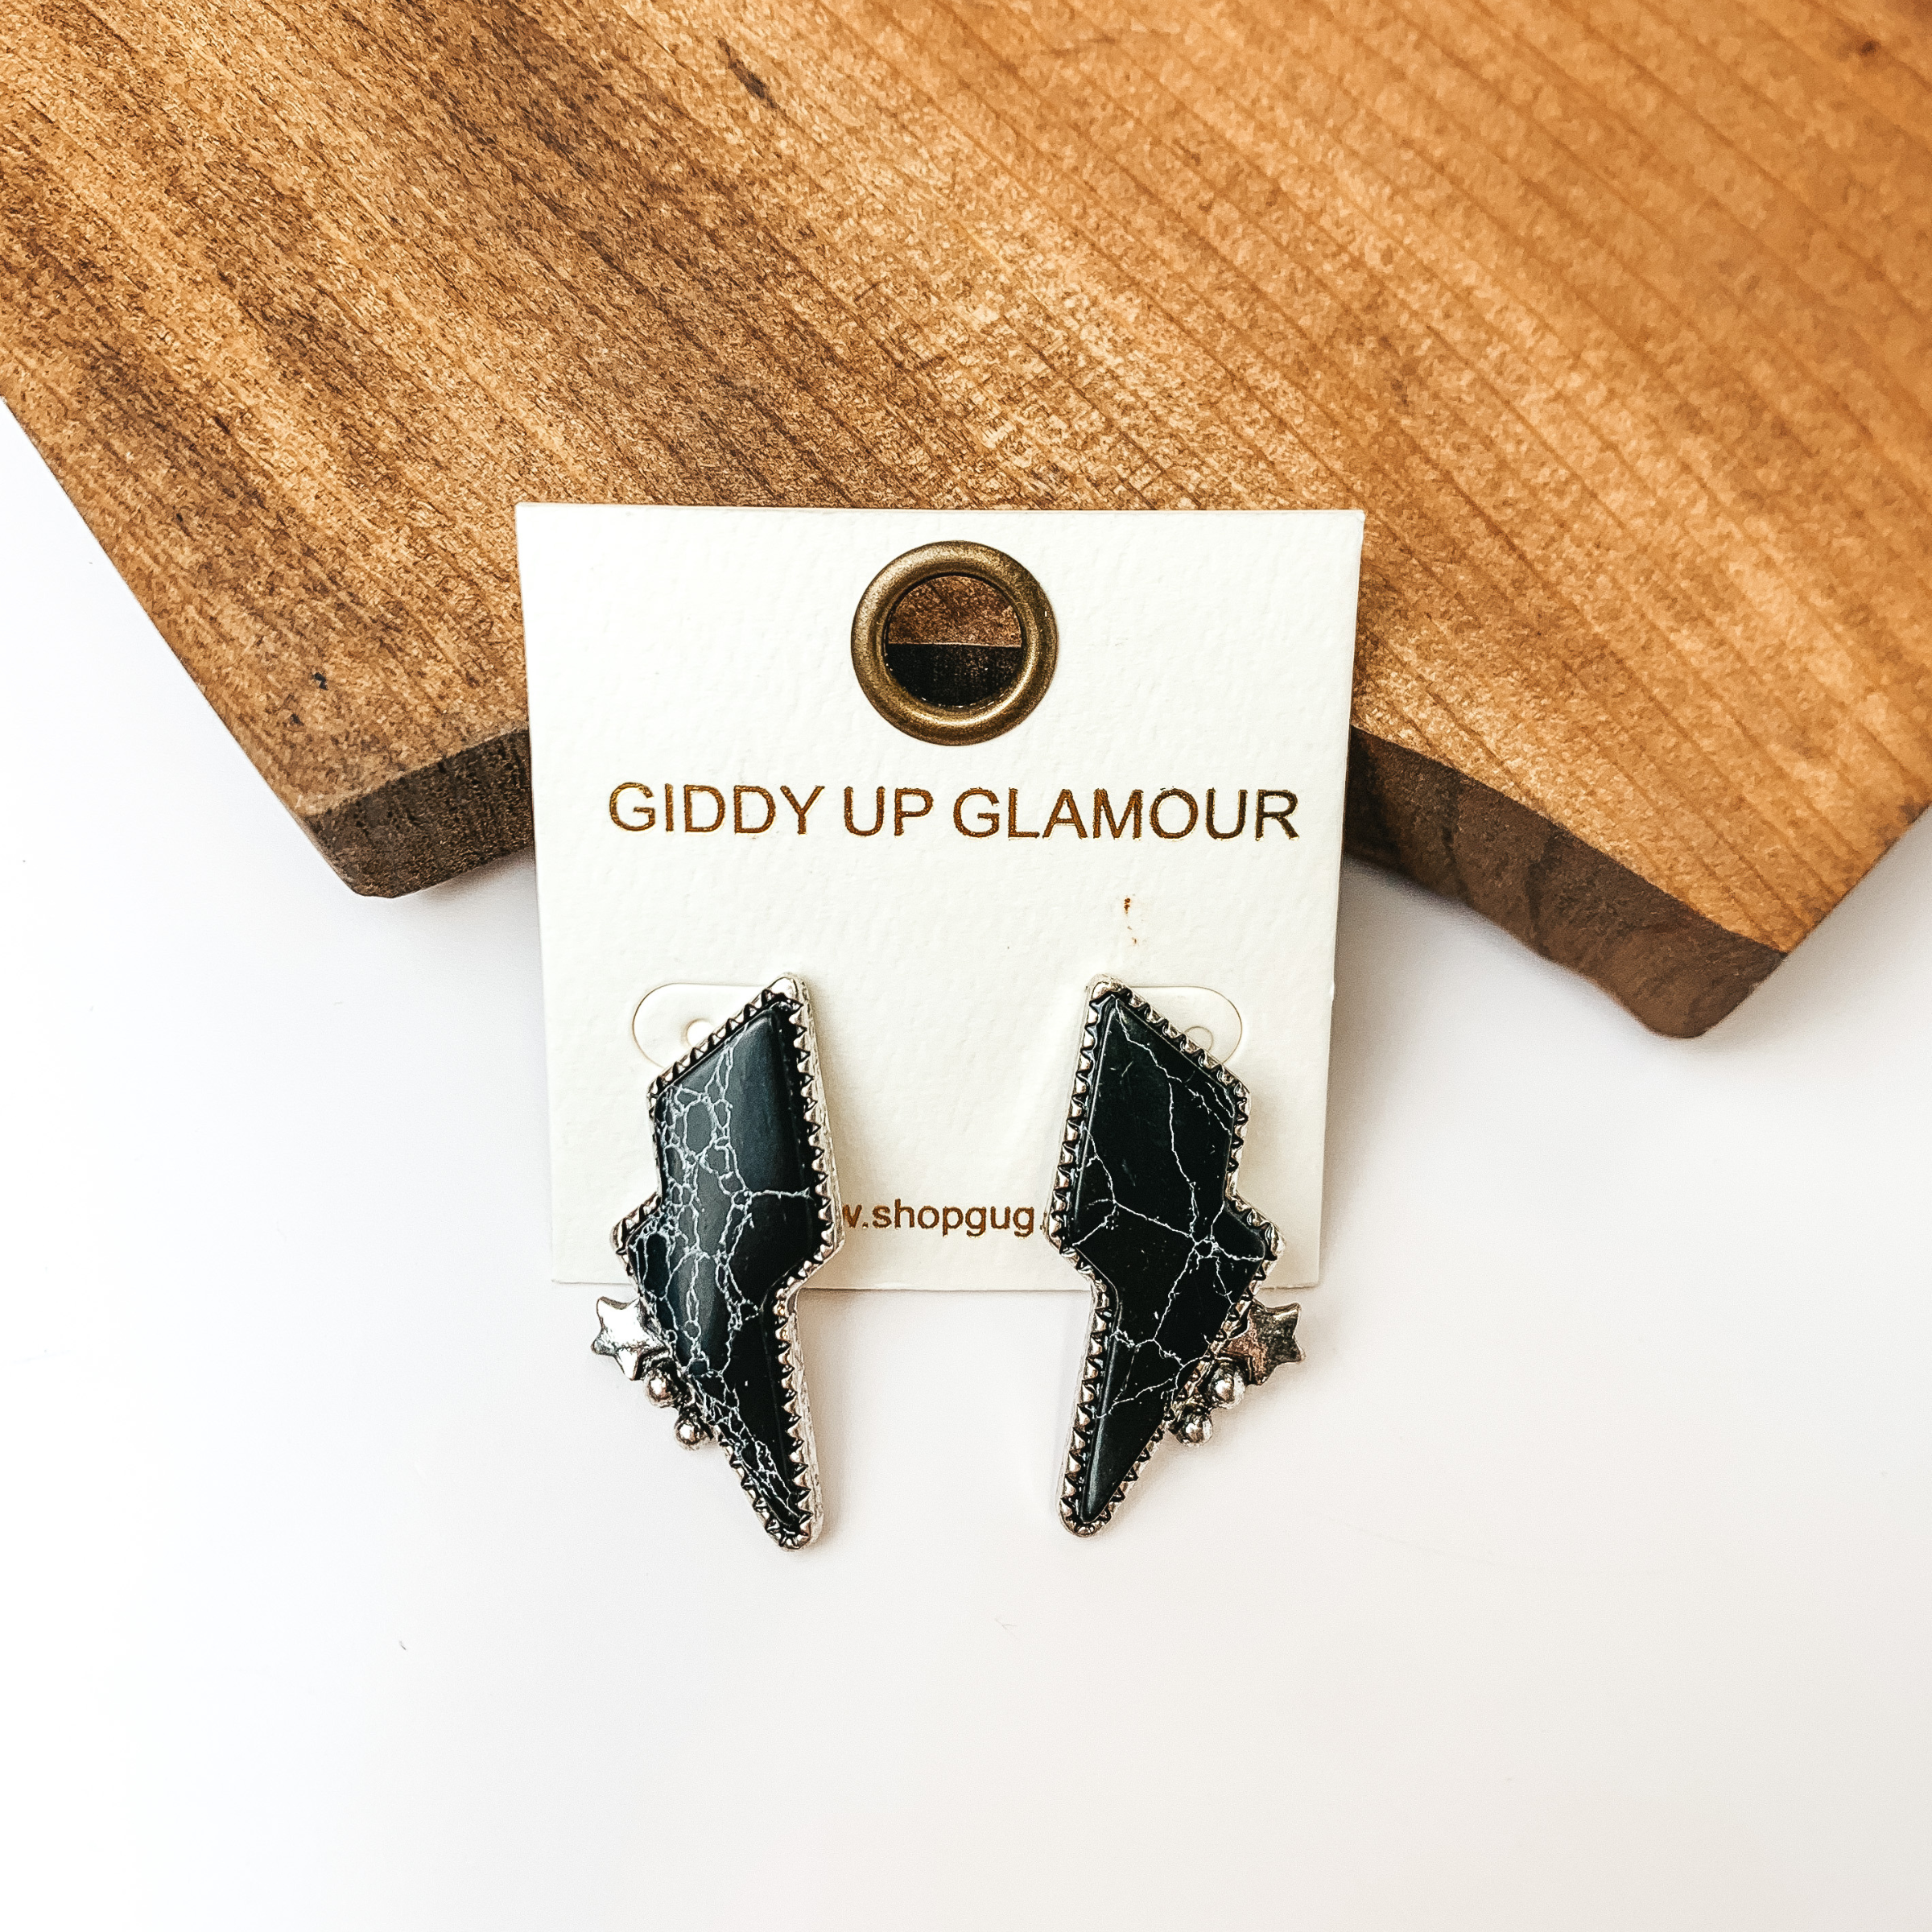 Driving Down Lightning Bolt Stone Post Earrings in Black with Silver Detailing. Pictured on a white background with the earrings against a piece of wood.